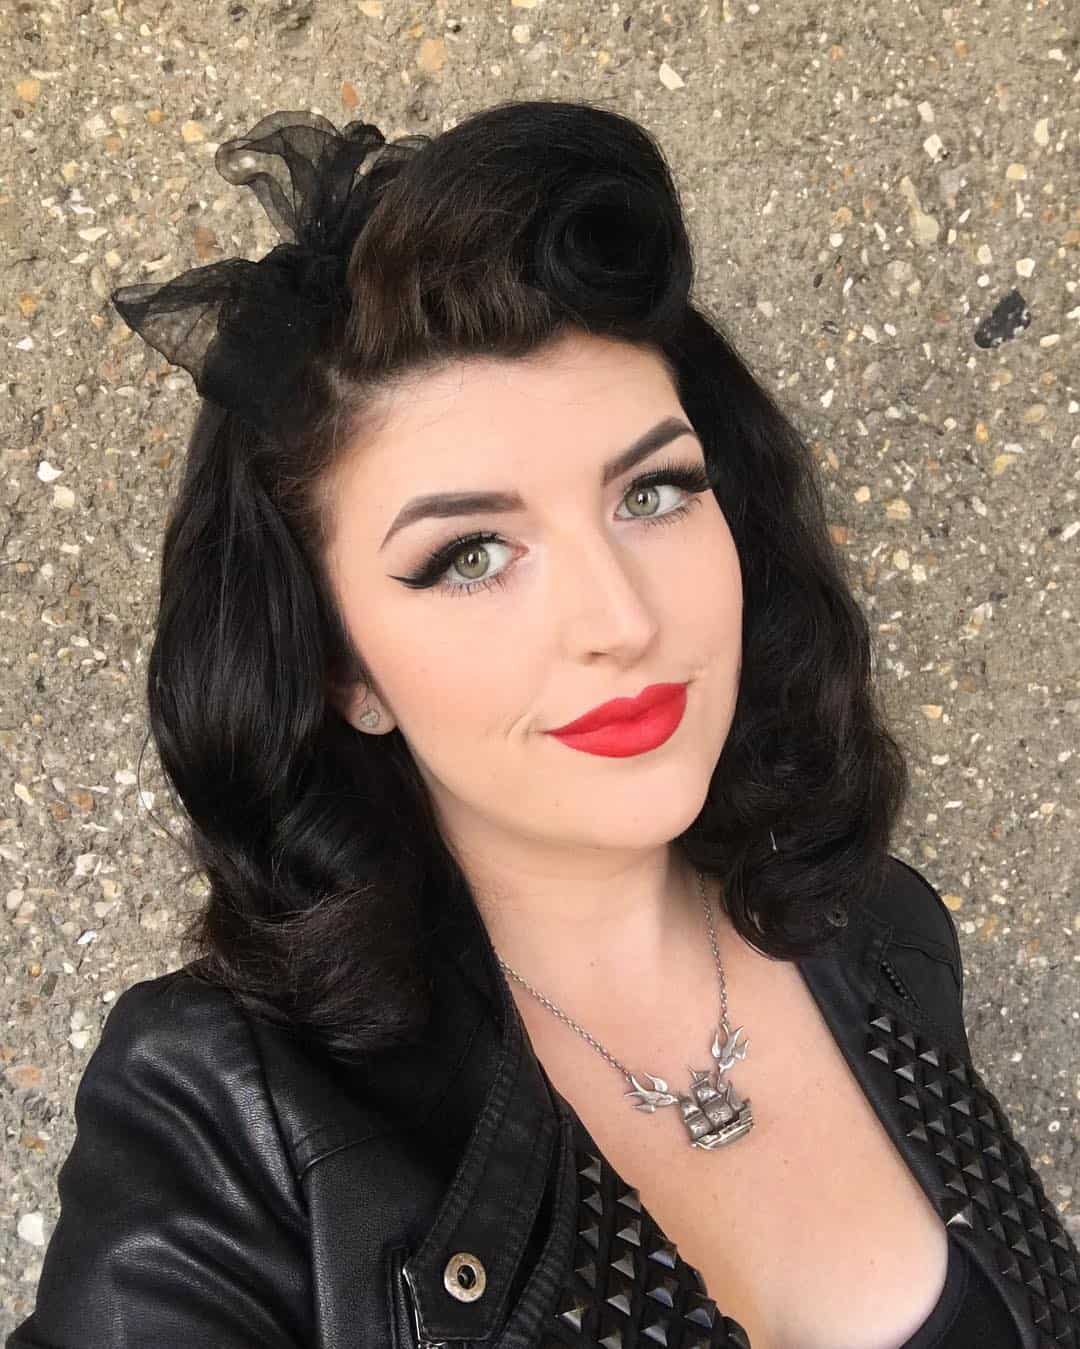 vintage pinup hairstyle with bandana